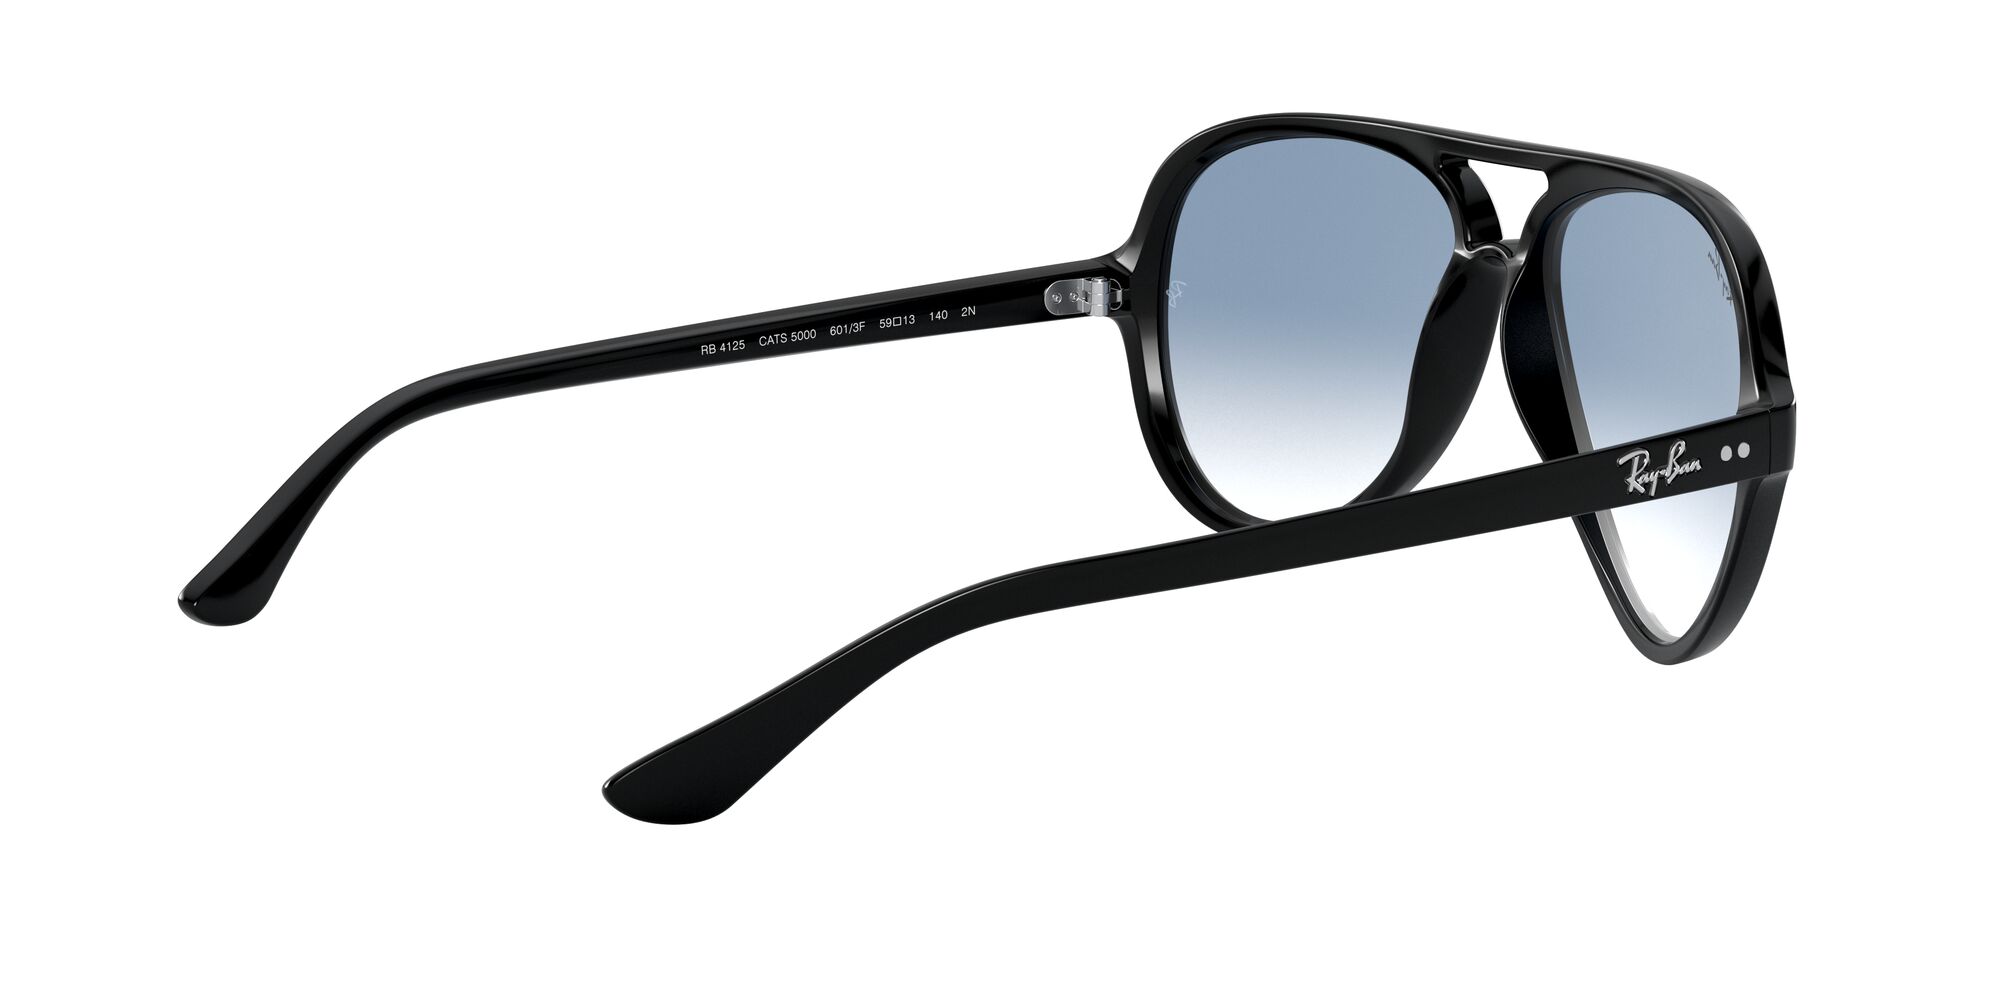 Ray-Ban RB4125 Cats 5000 Sunglasses - image 9 of 12